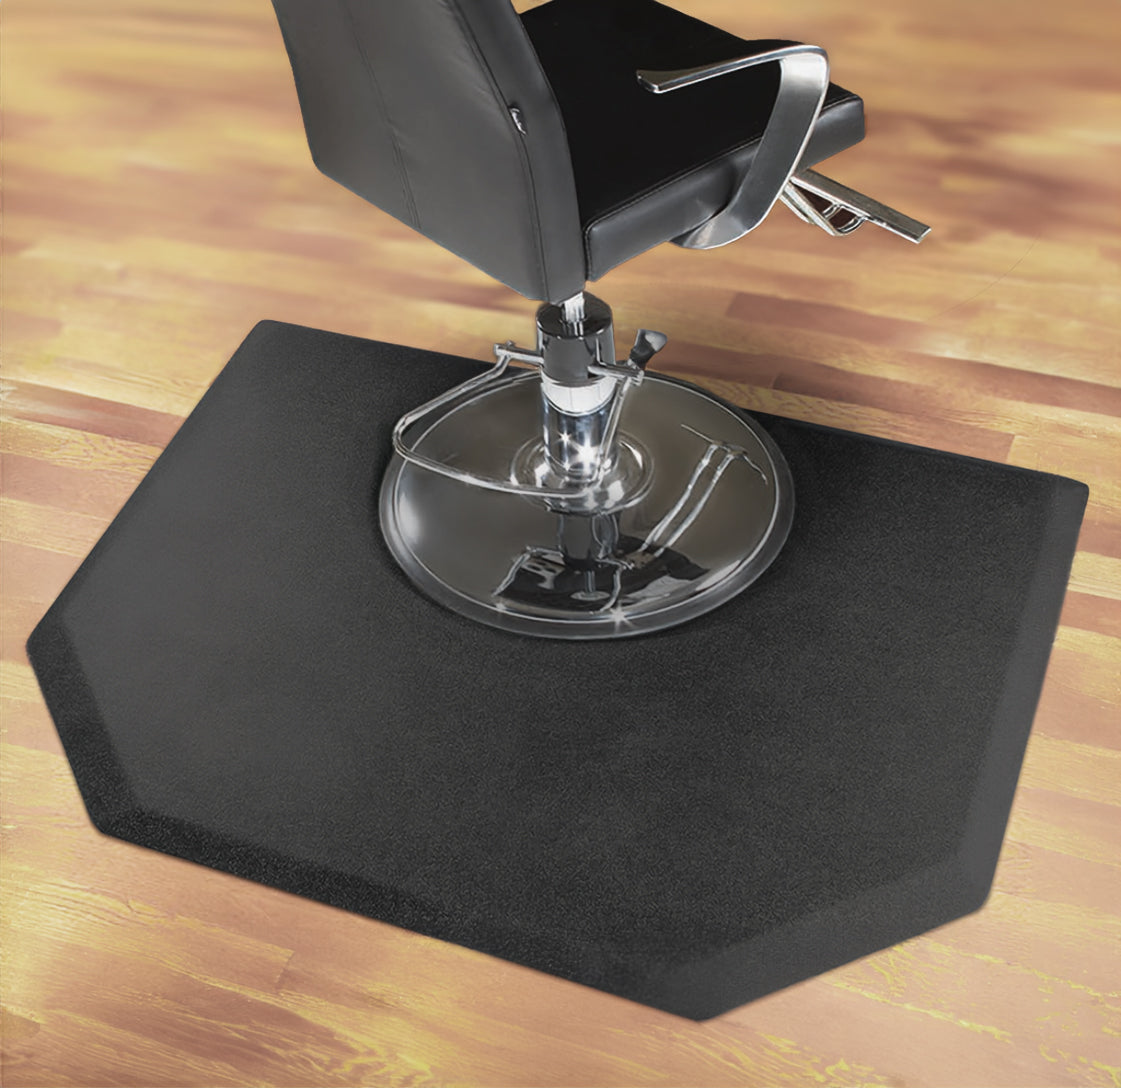 Granite Steel Mat with salon chair on top